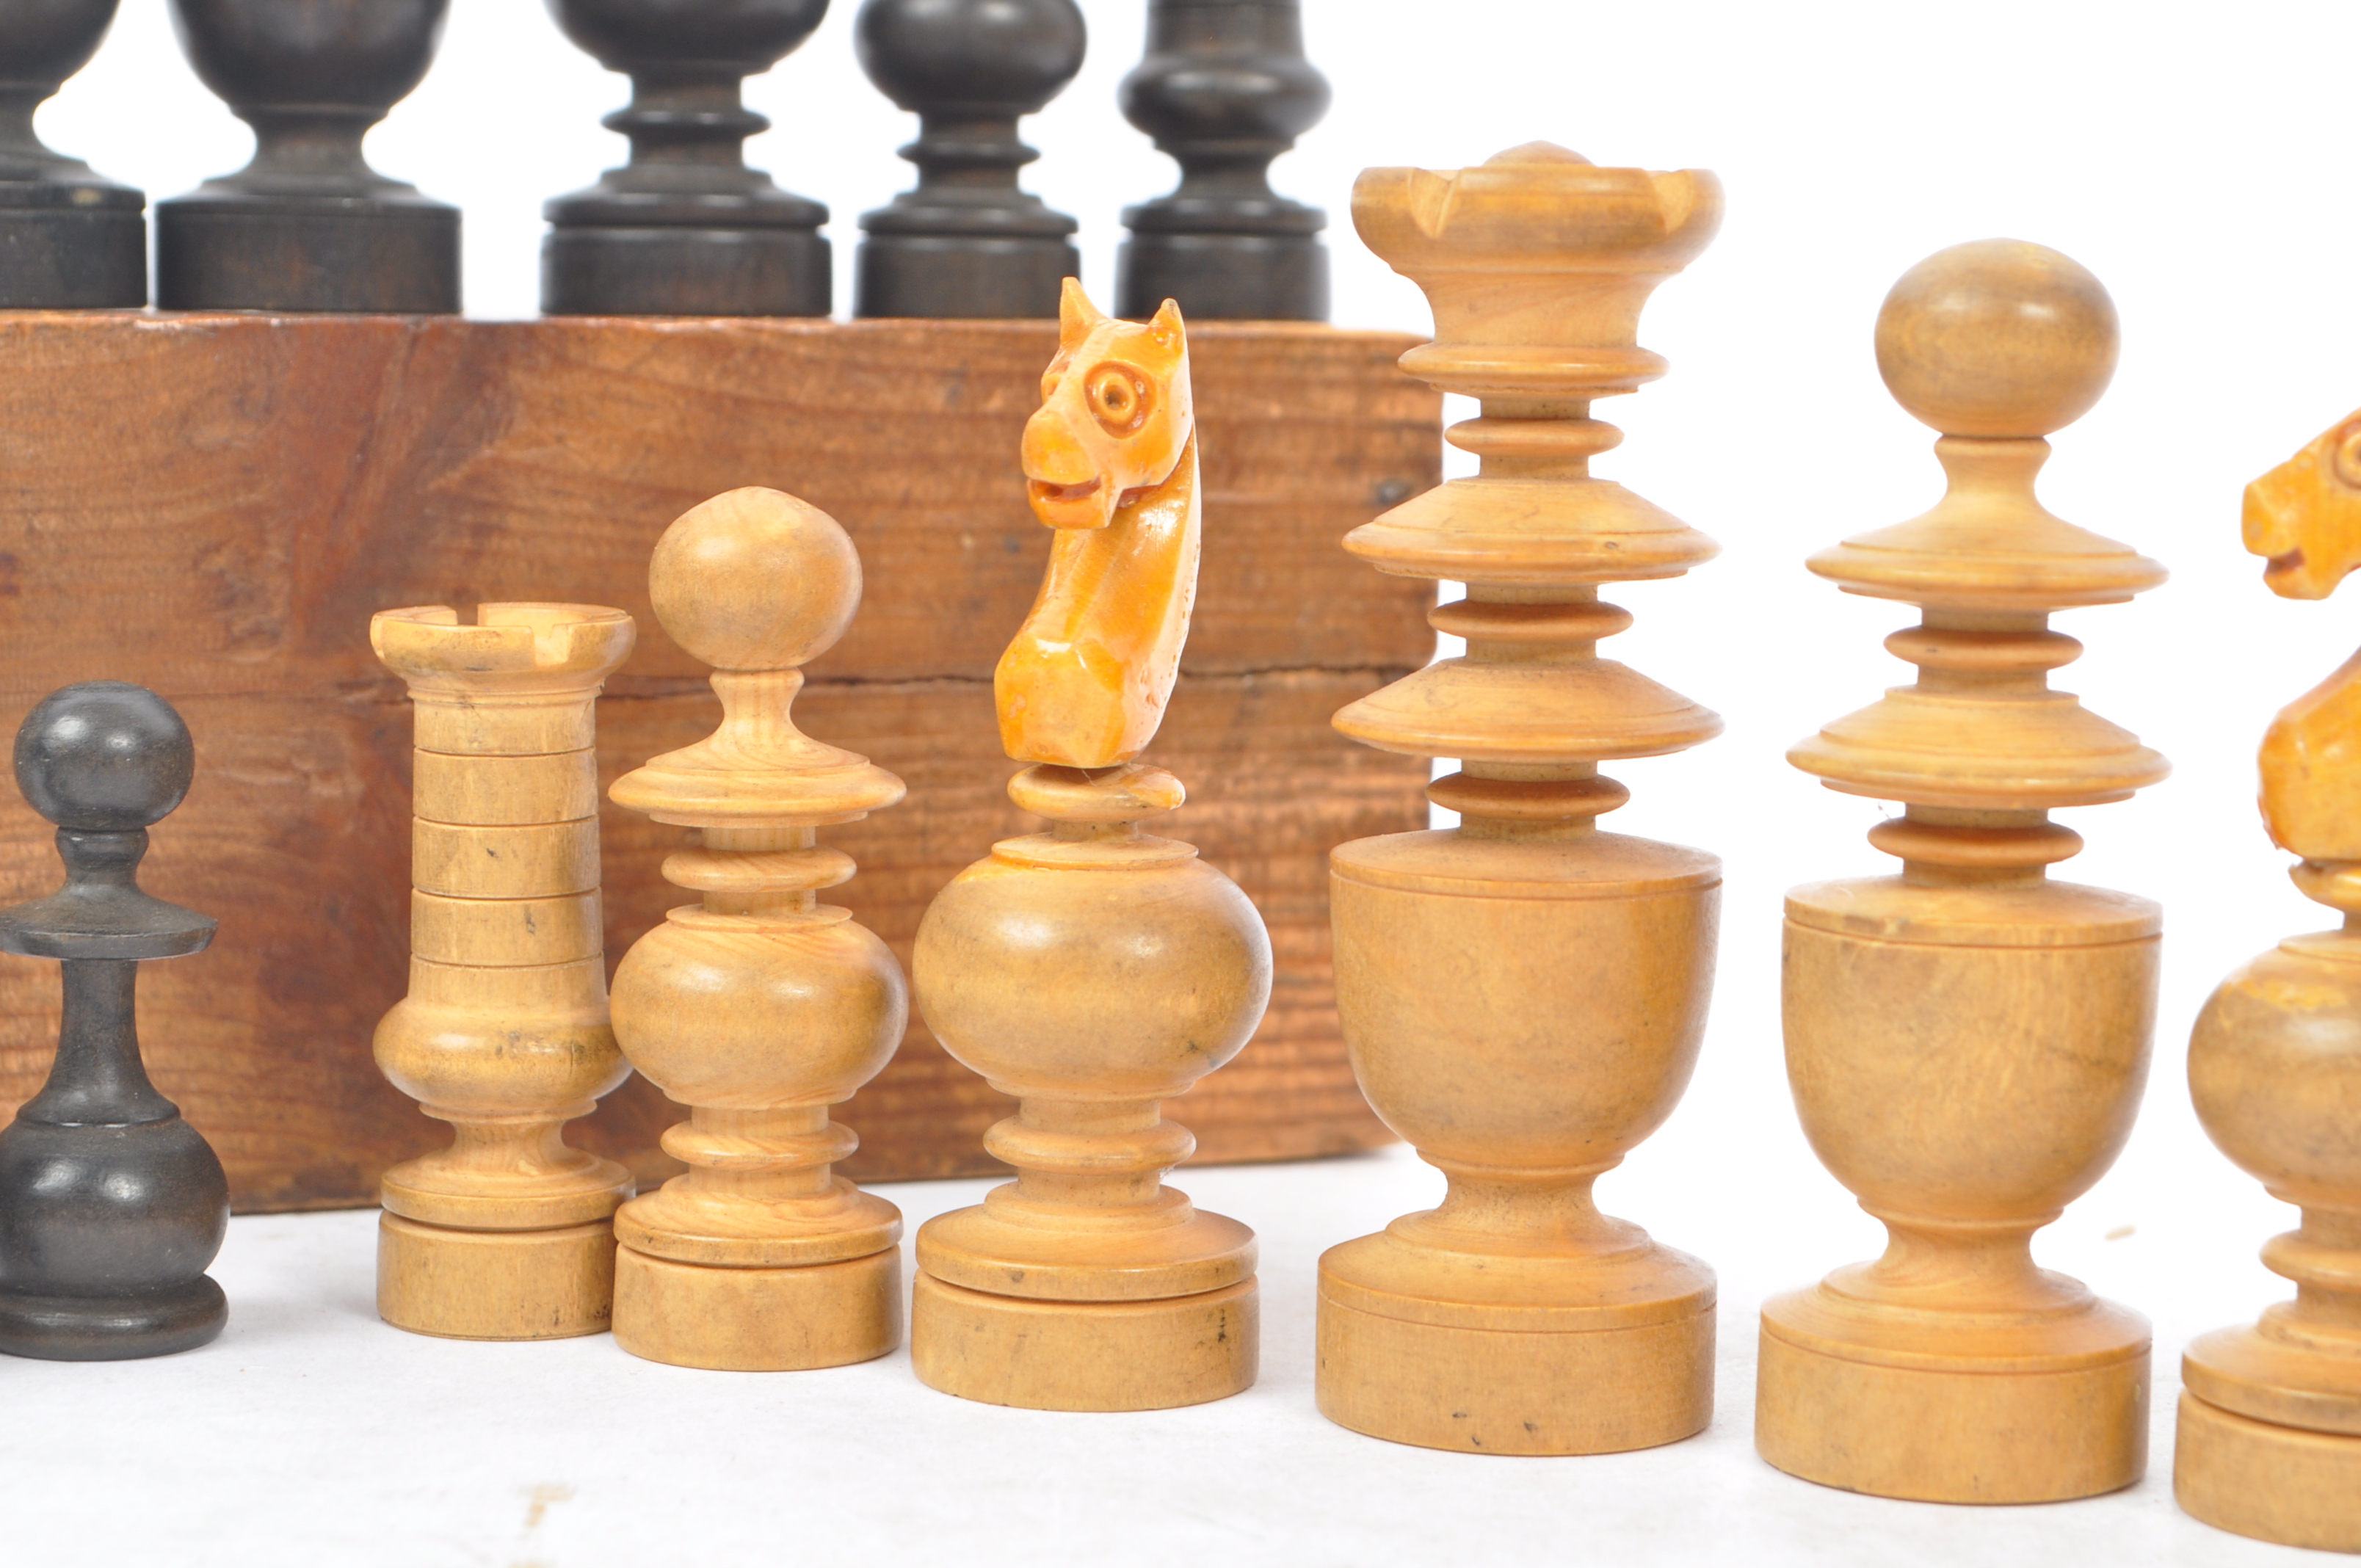 EARLY 20TH CENTURY TURNED WOODEN CHESS SET - Image 6 of 7